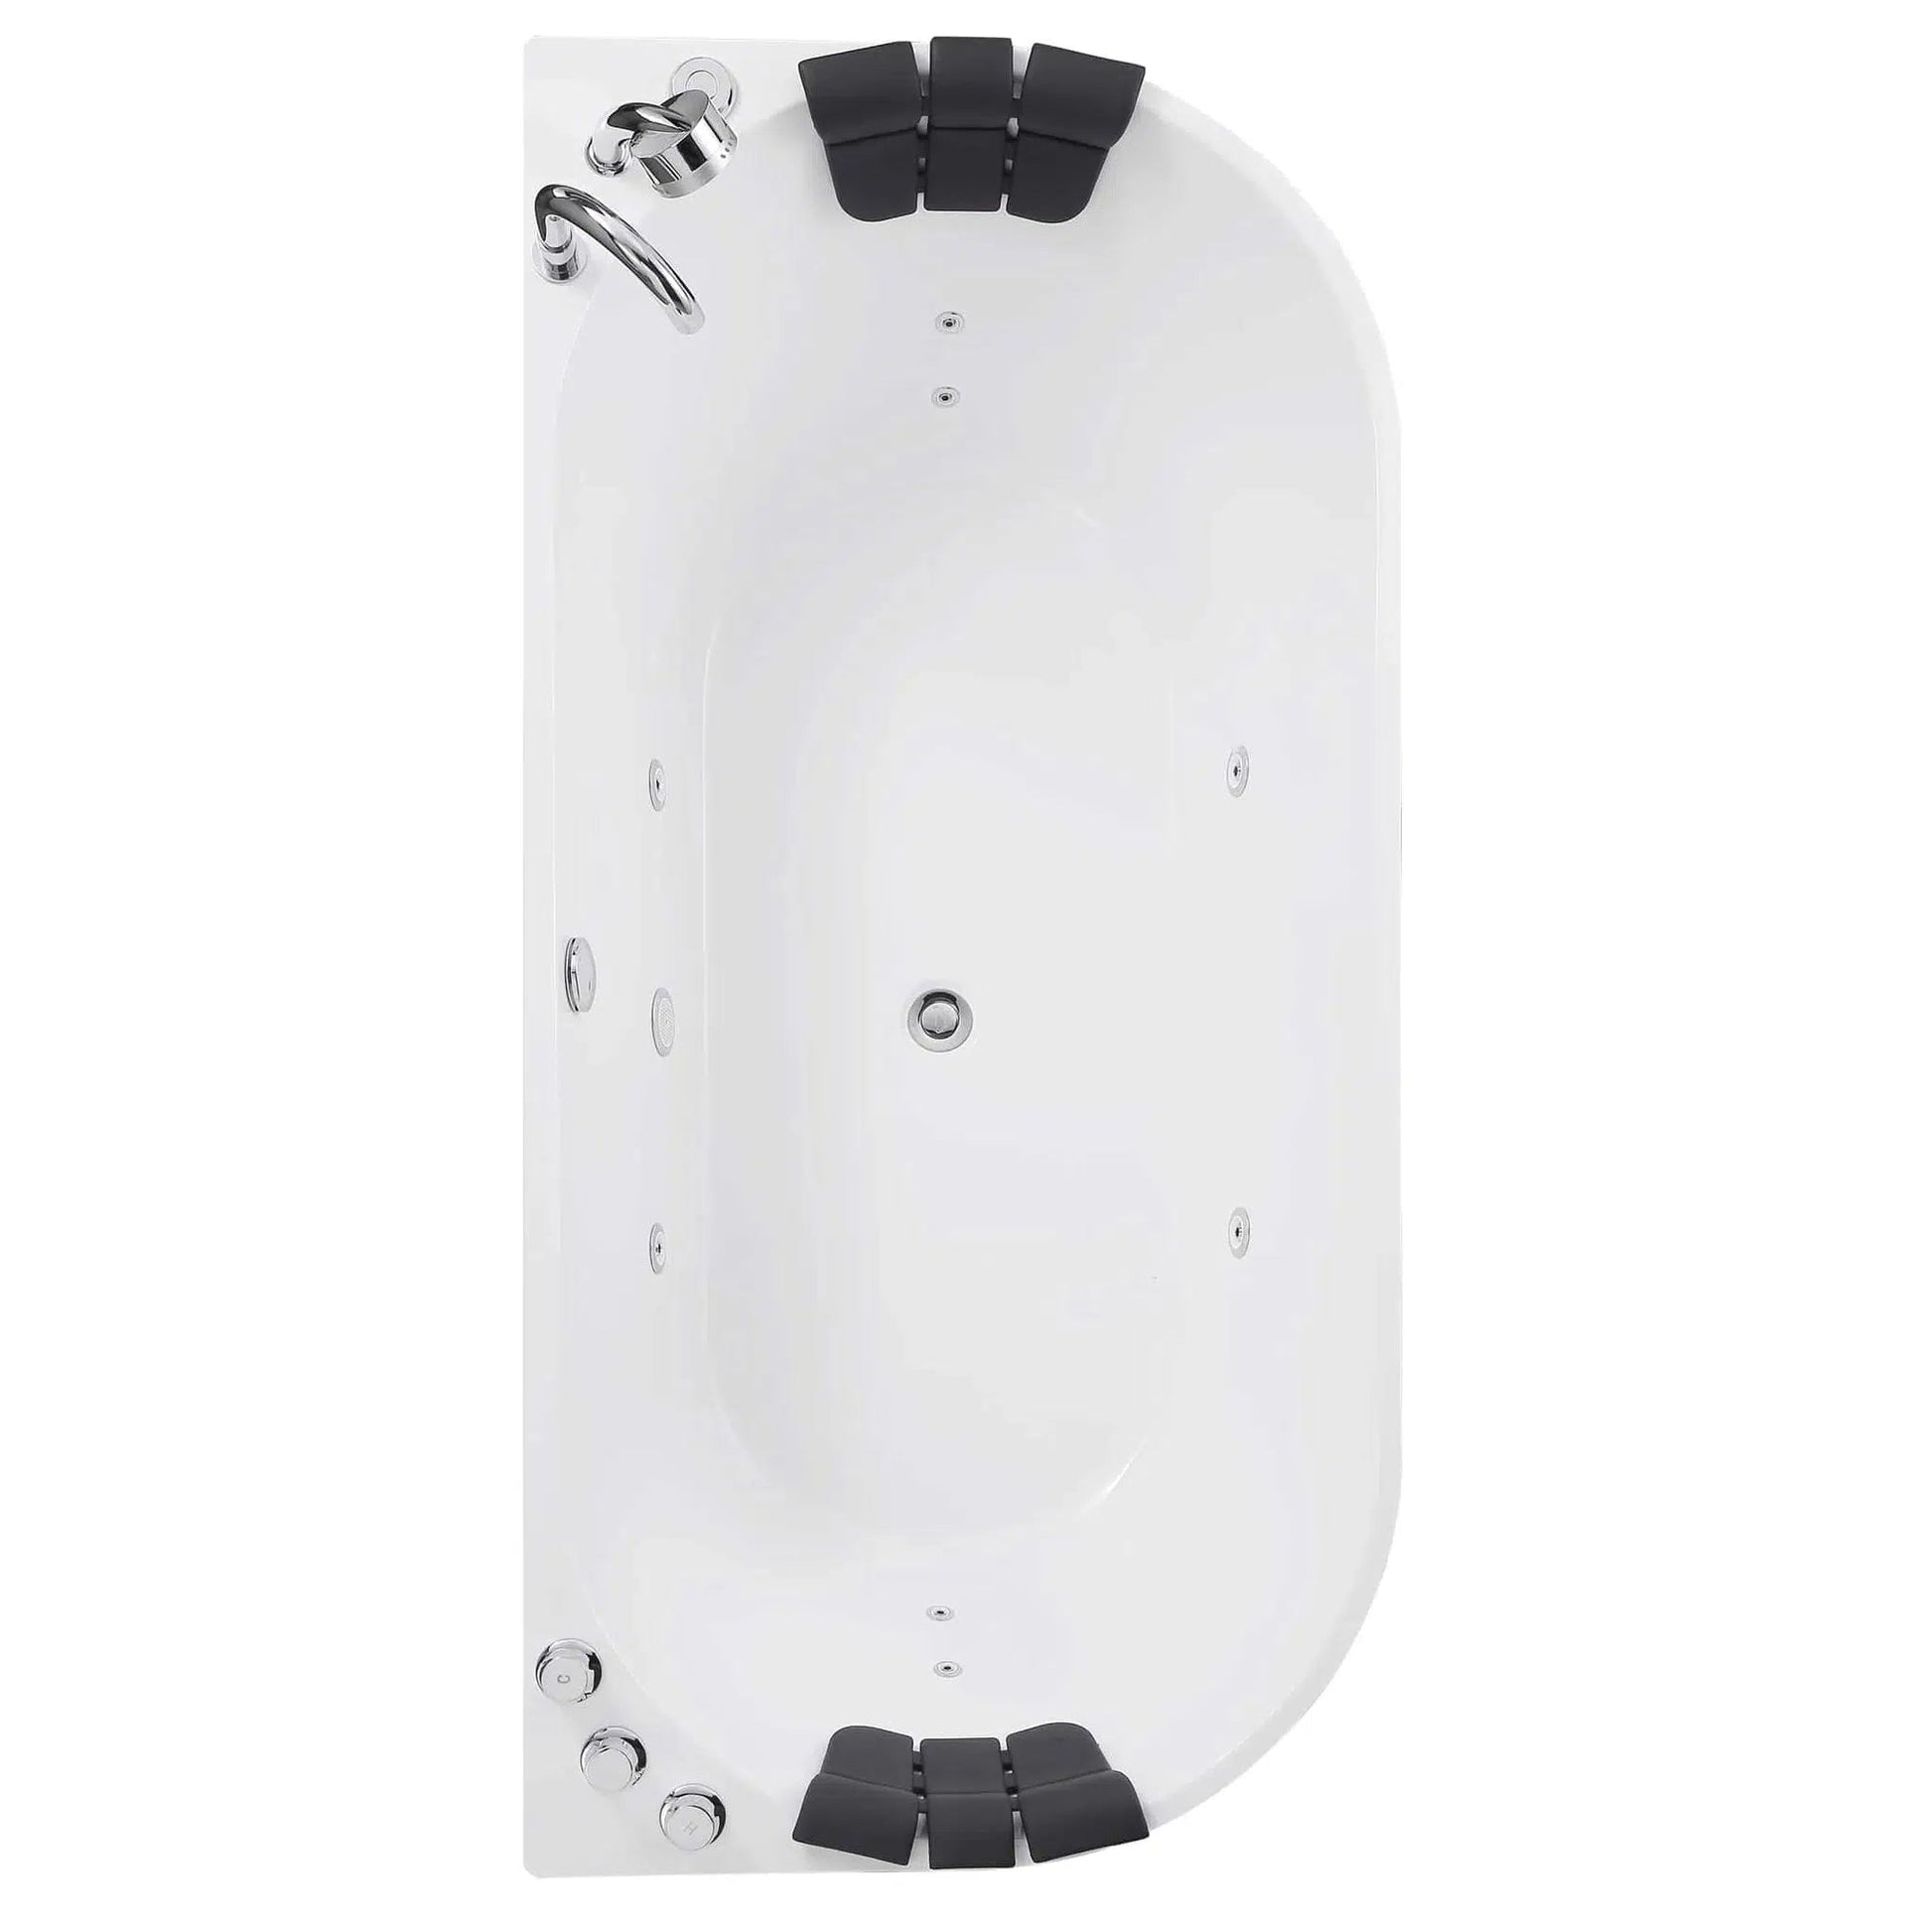 Empava 59" 2-Person White Neo-Angle Whirlpool Bathtub With Center Drain